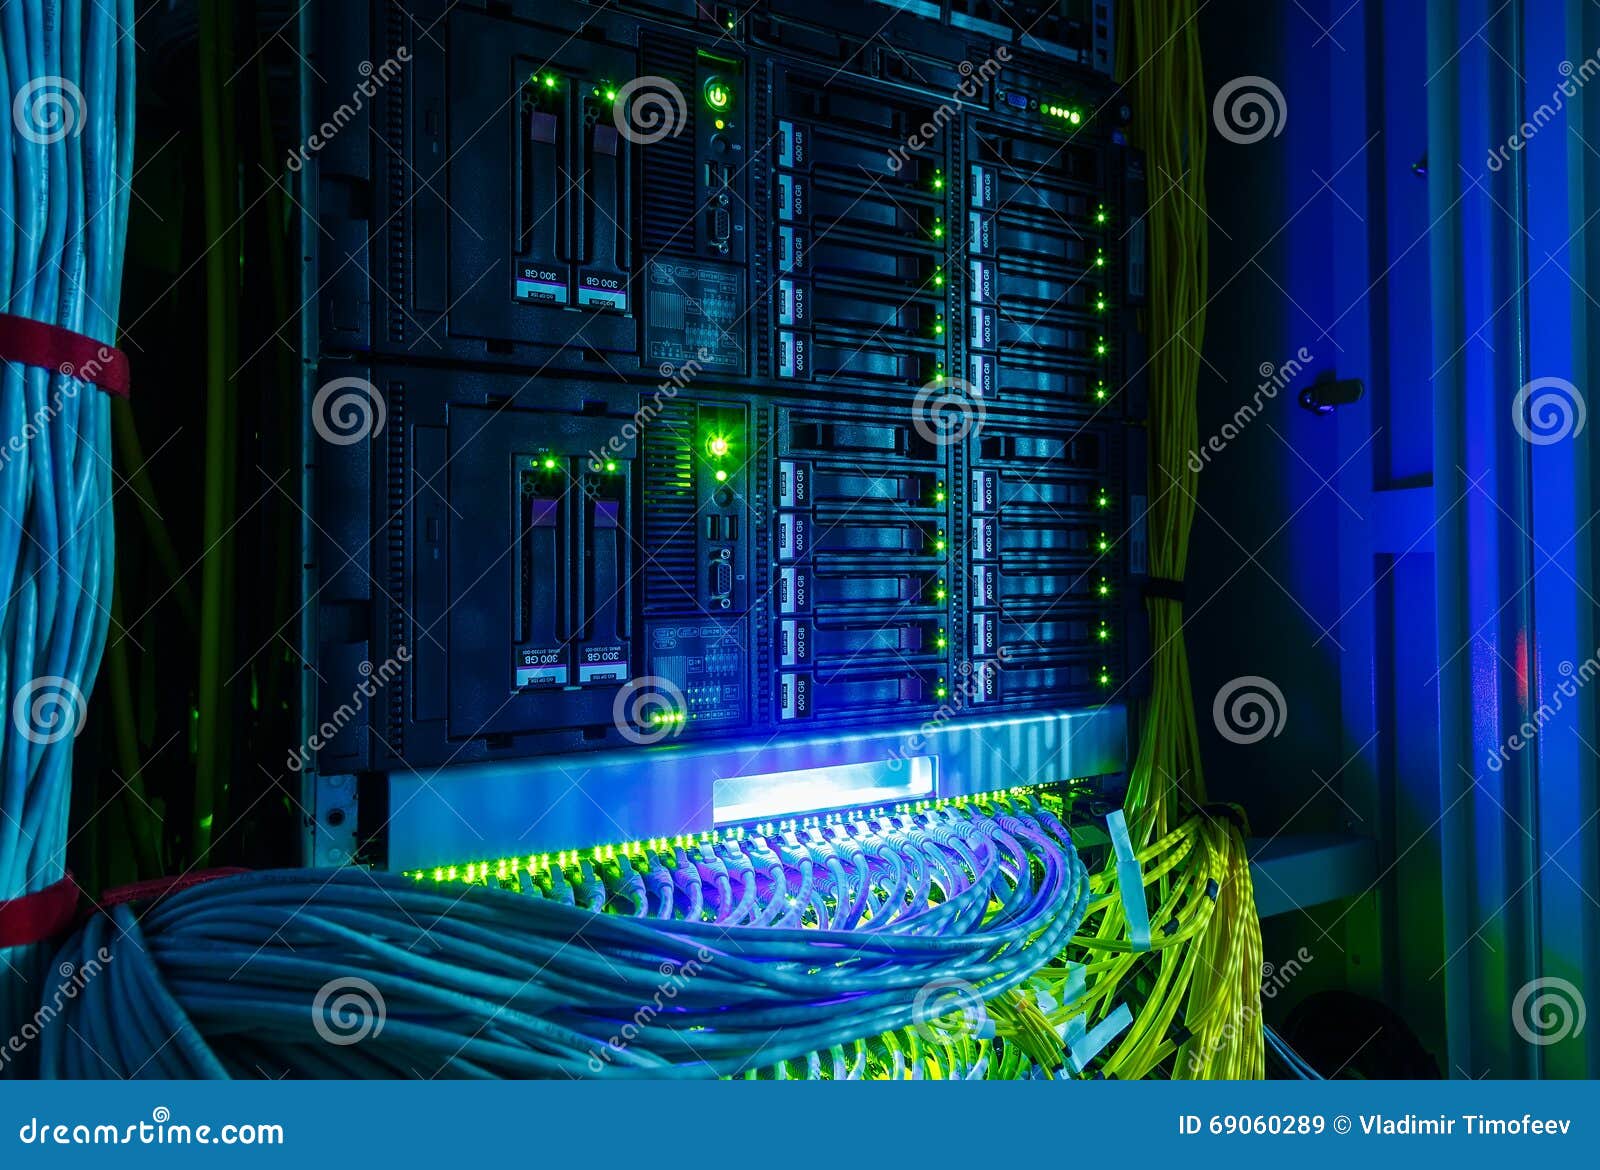 network switch and utp ethernet cables close-up in the server room